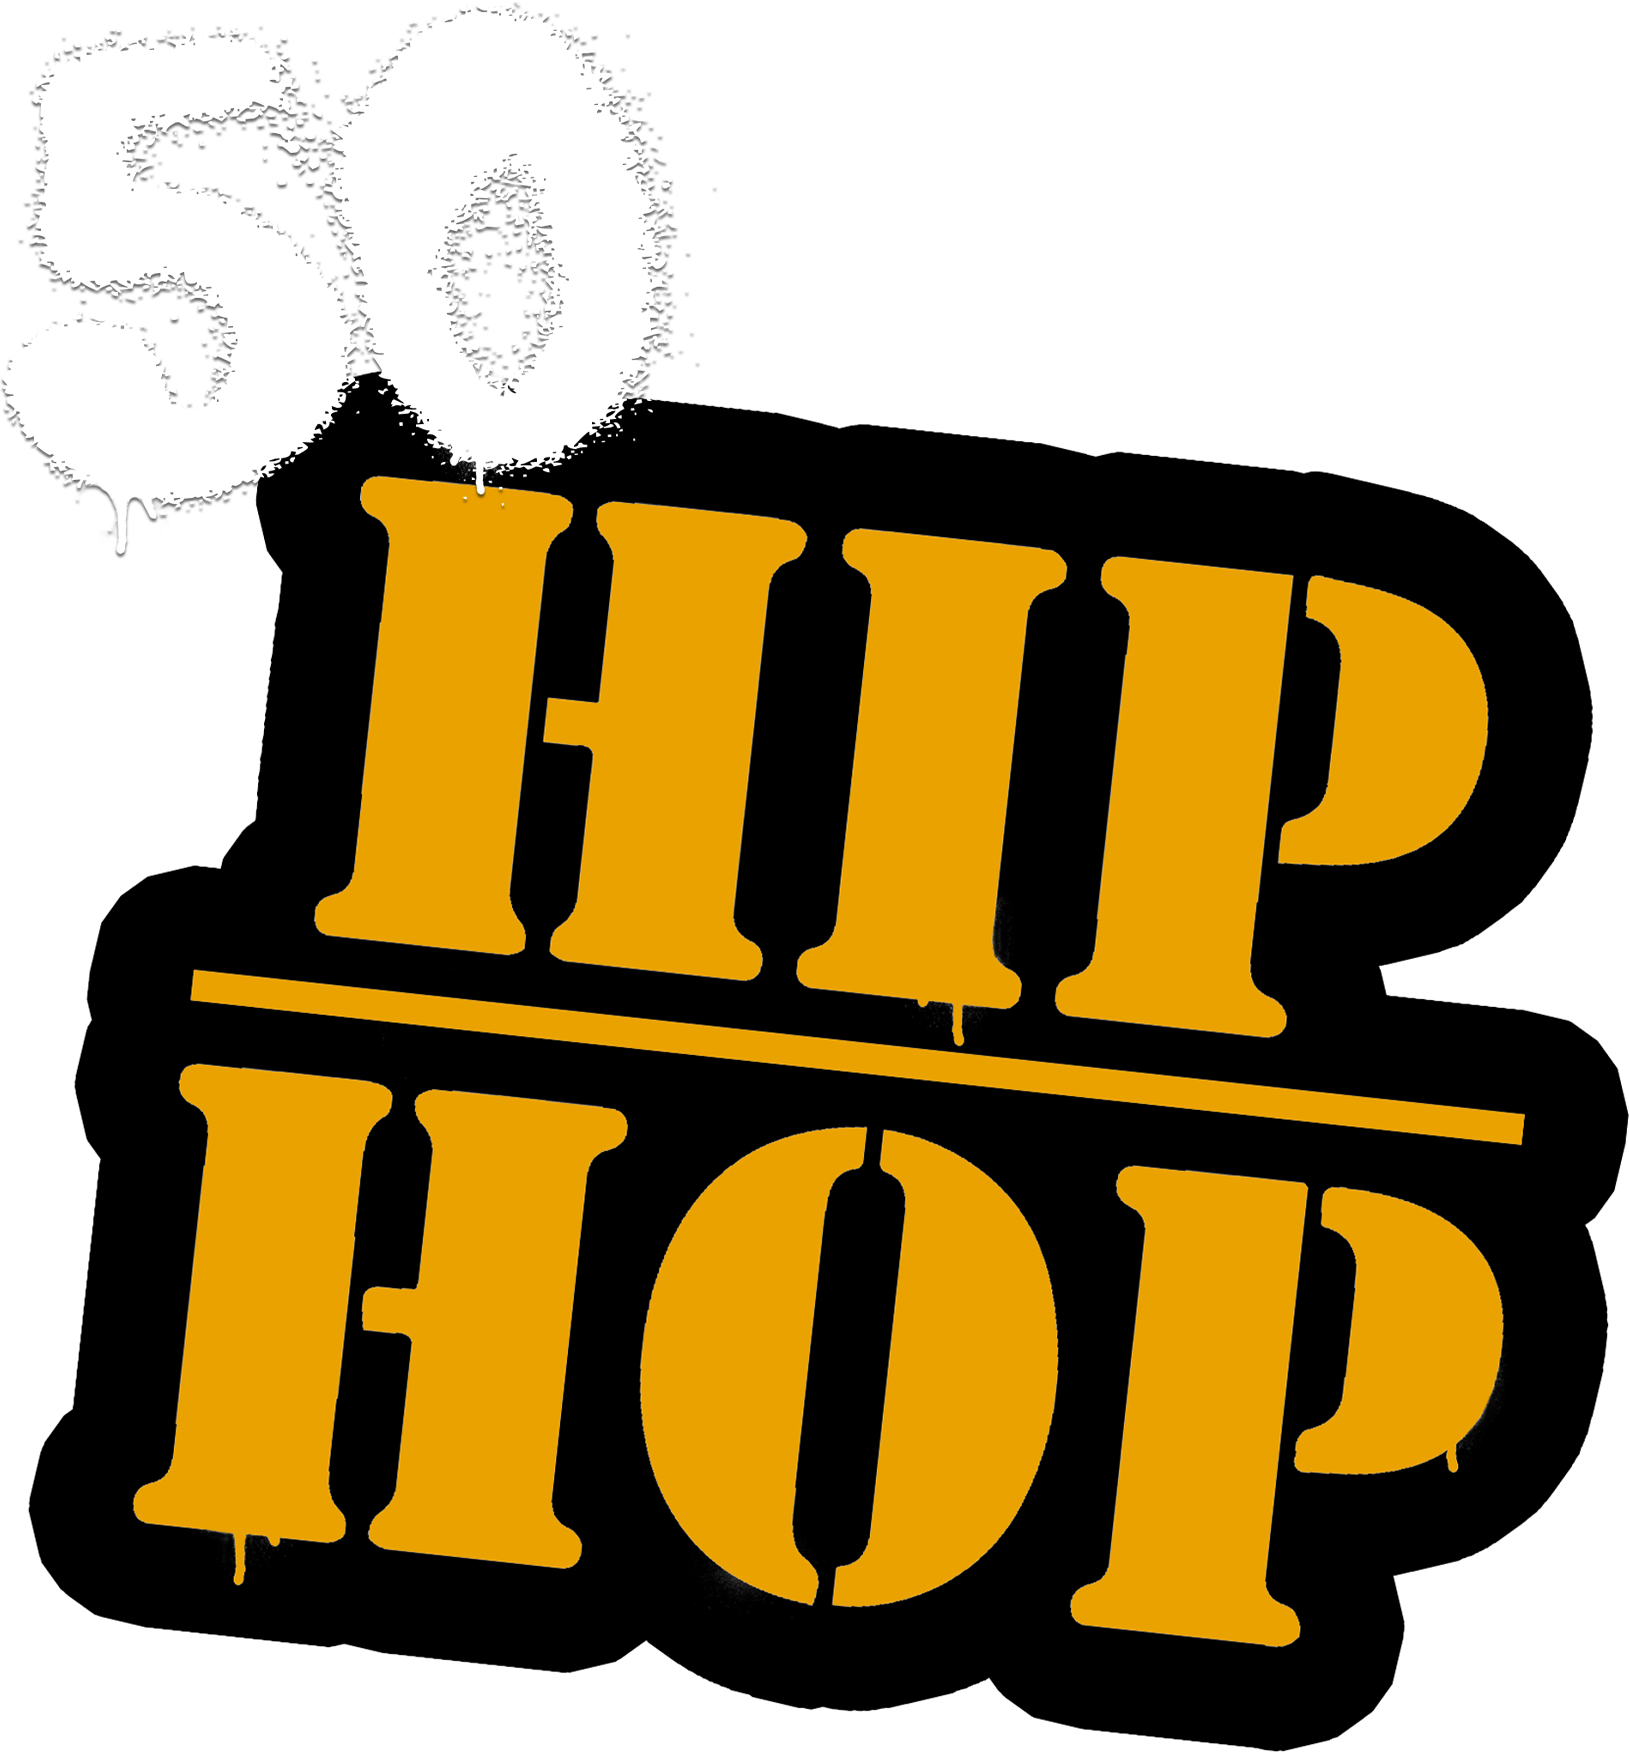 Celebrate Our 50th Hip-Hop Record